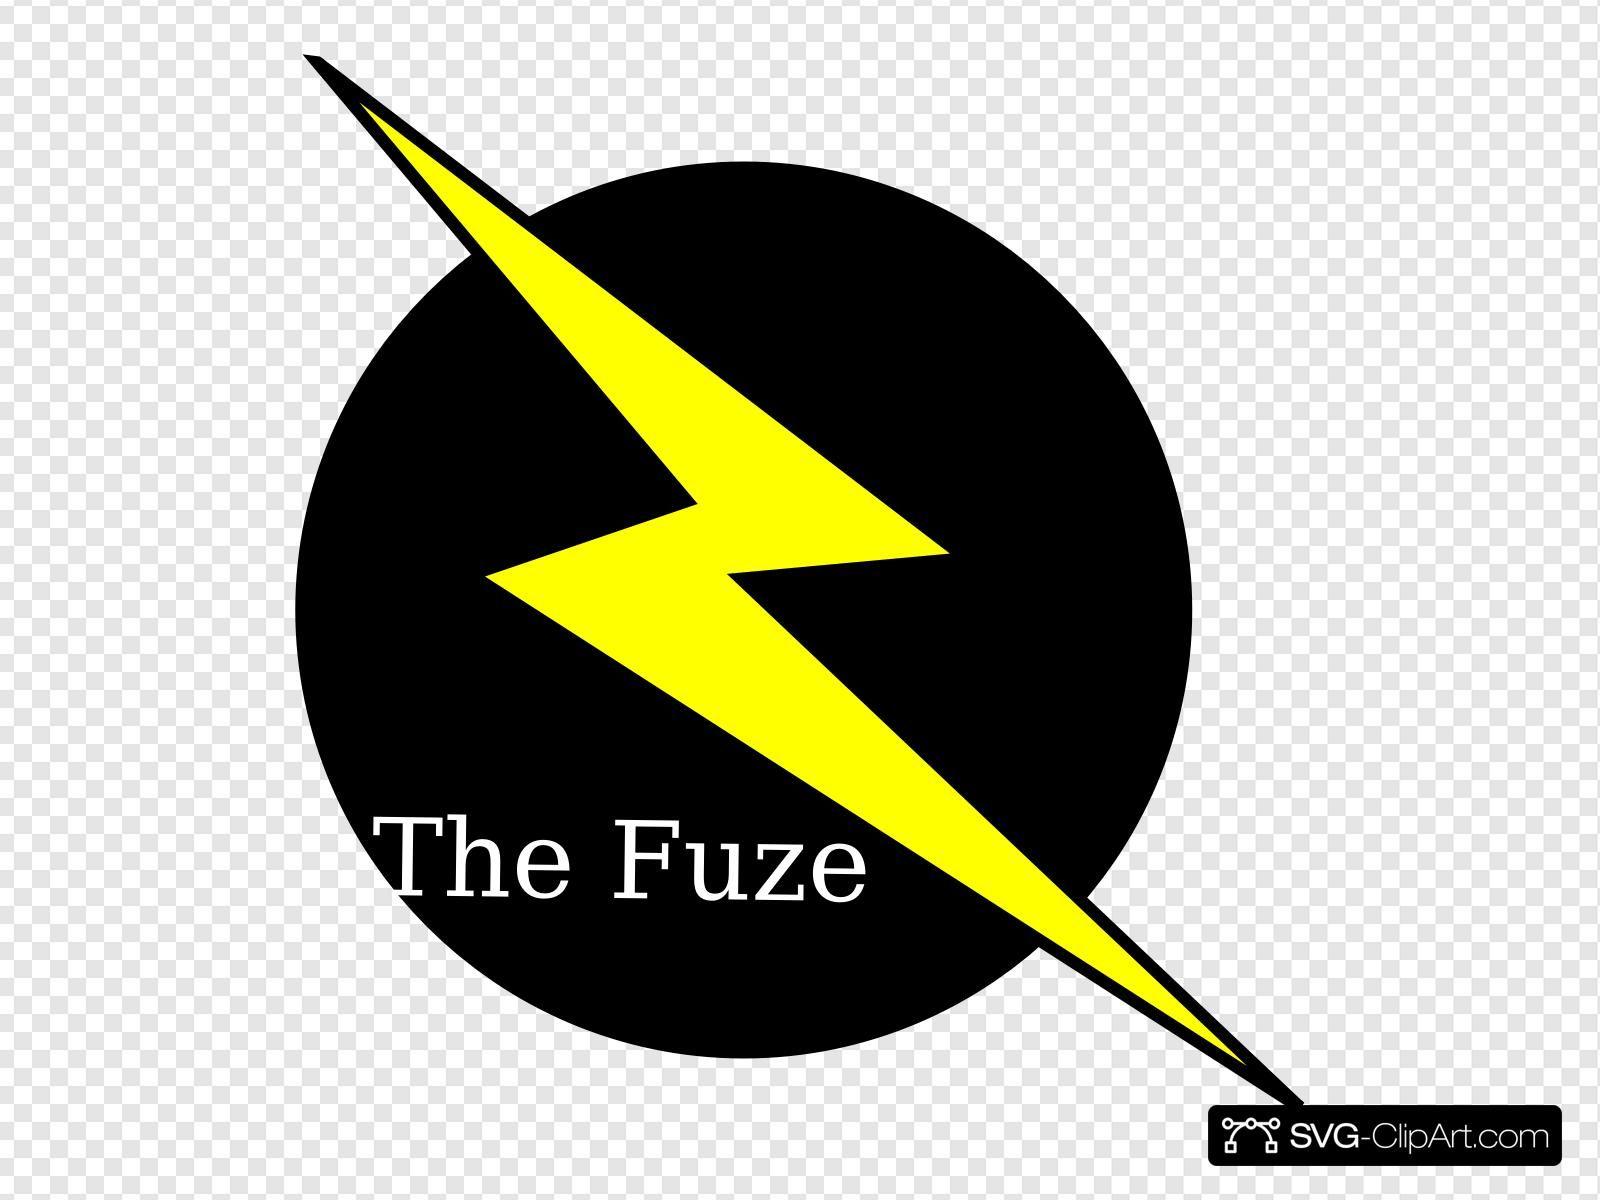 Fuze Logo - The Fuze Logo Clip art, Icon and SVG - SVG Clipart